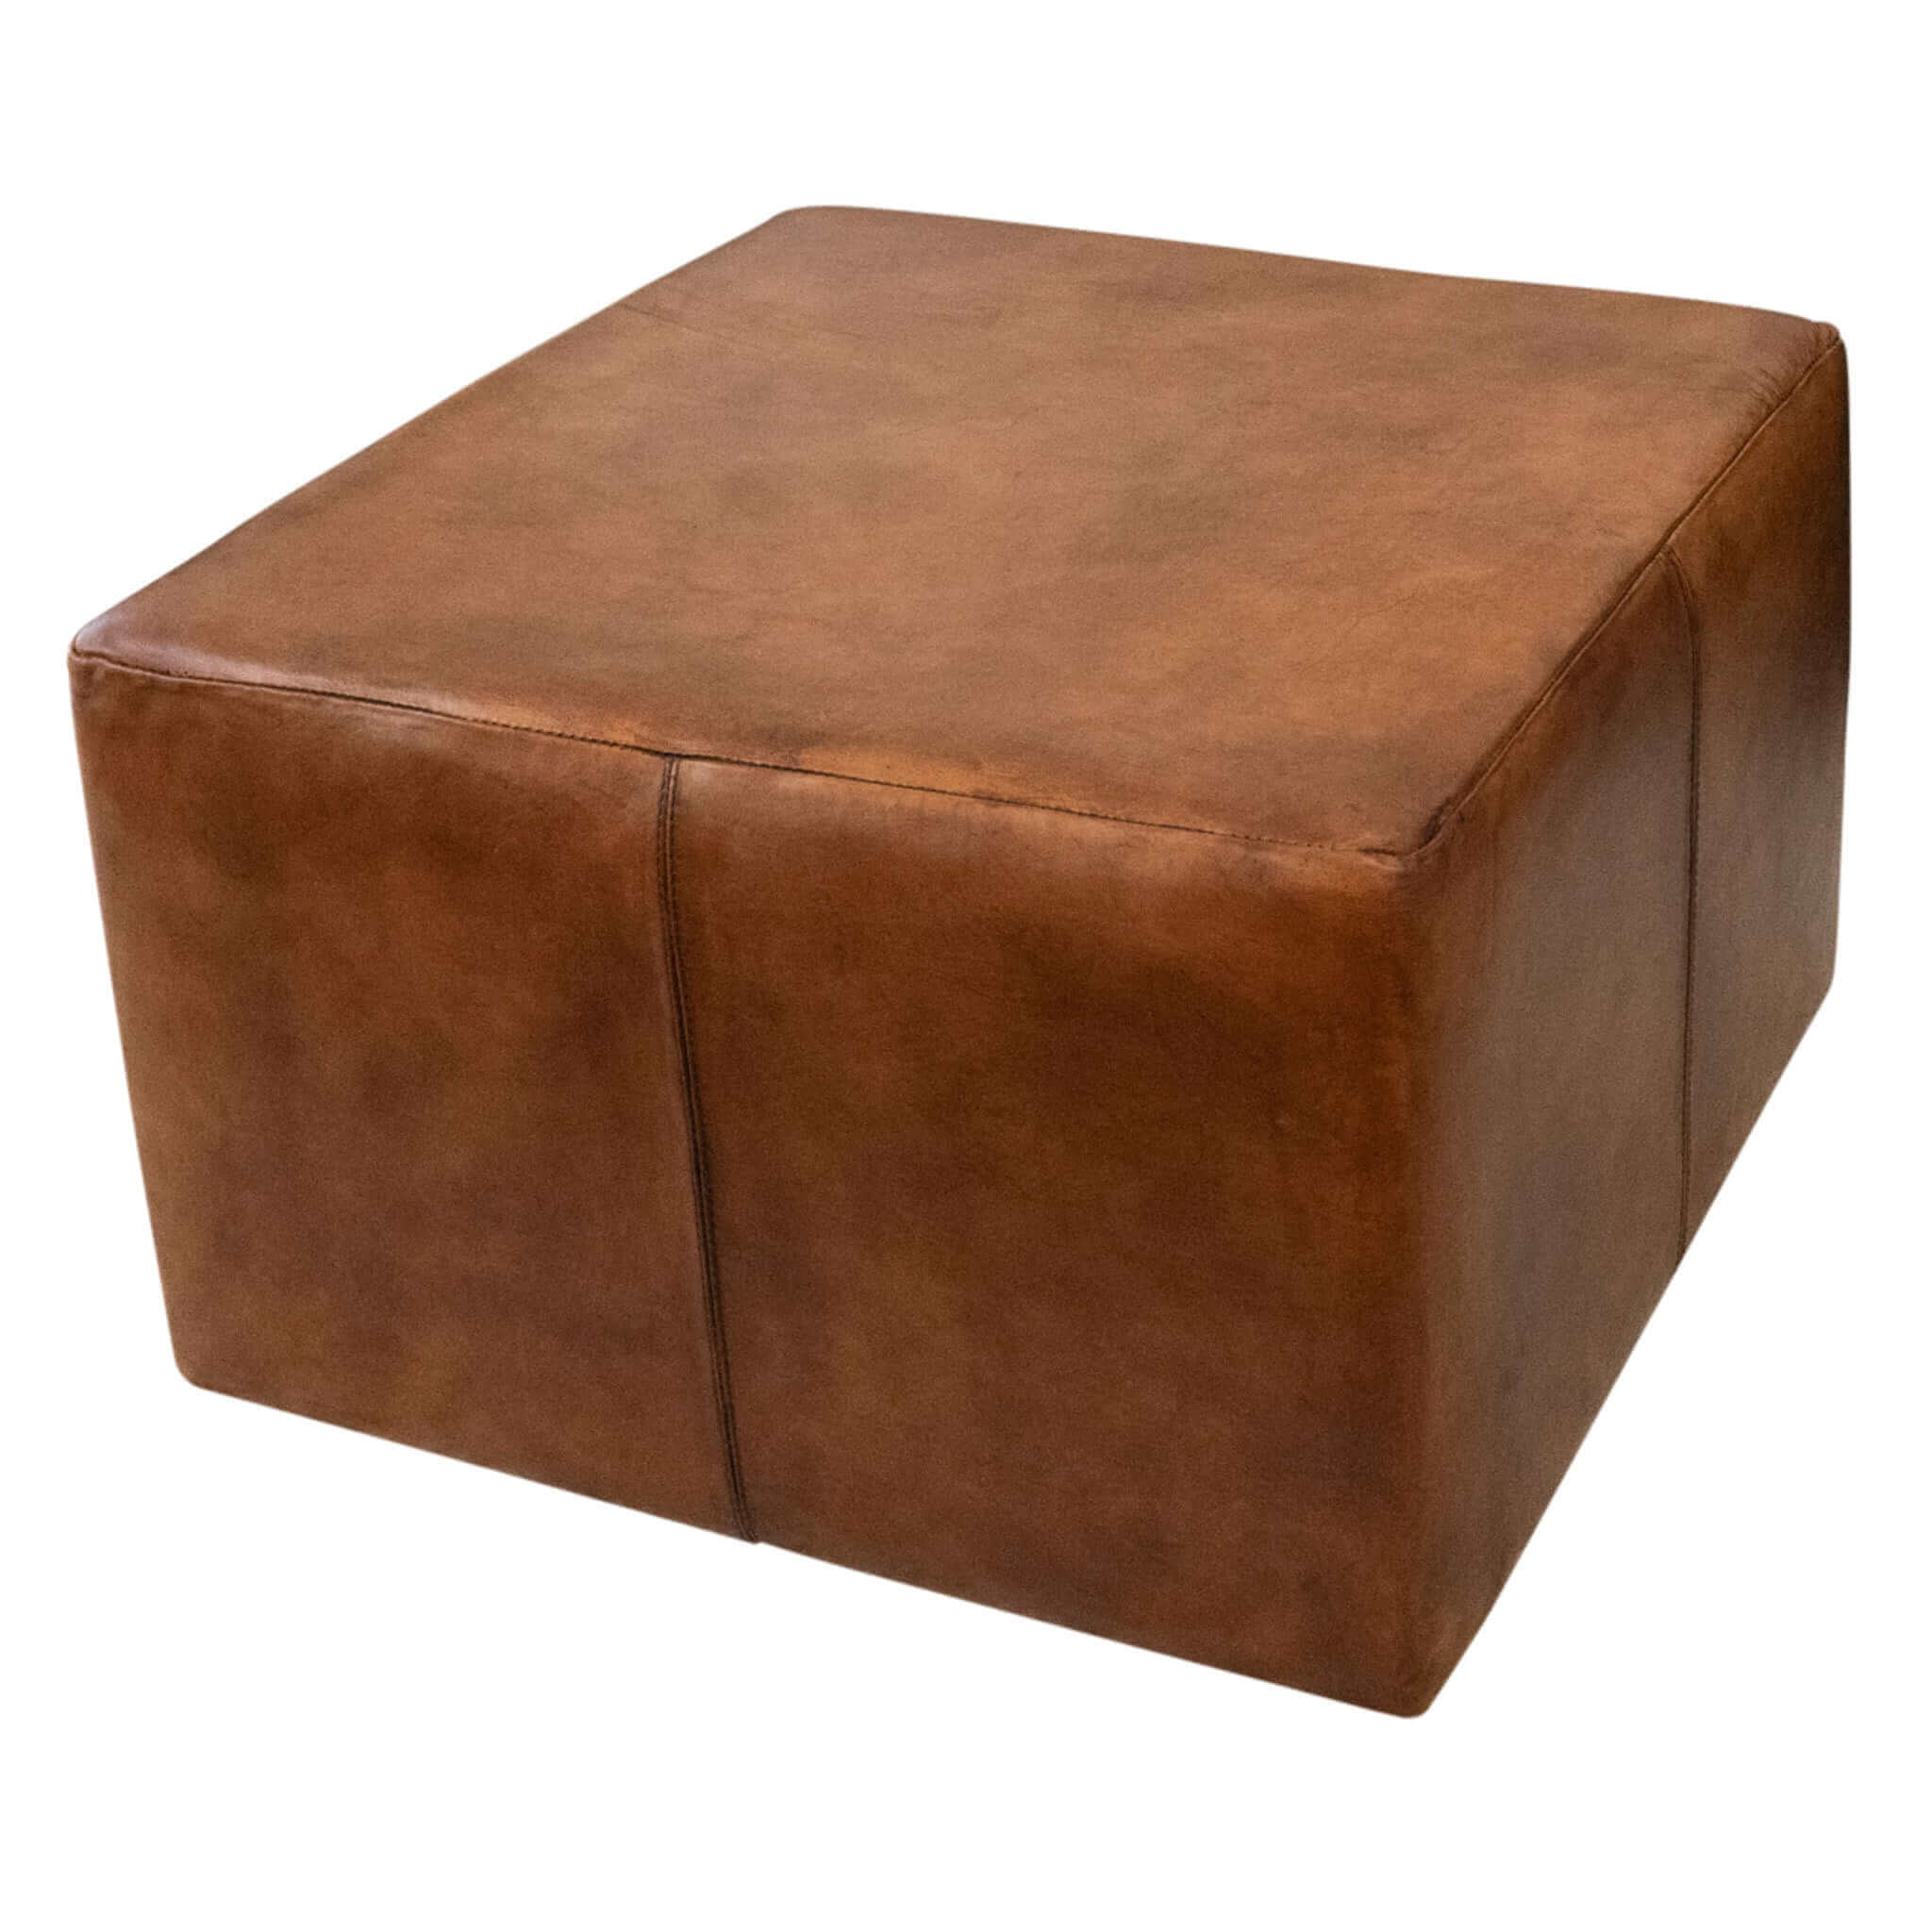 Mallory Mid-Century Square Genuine Leather Upholstered Ottoman in Tan